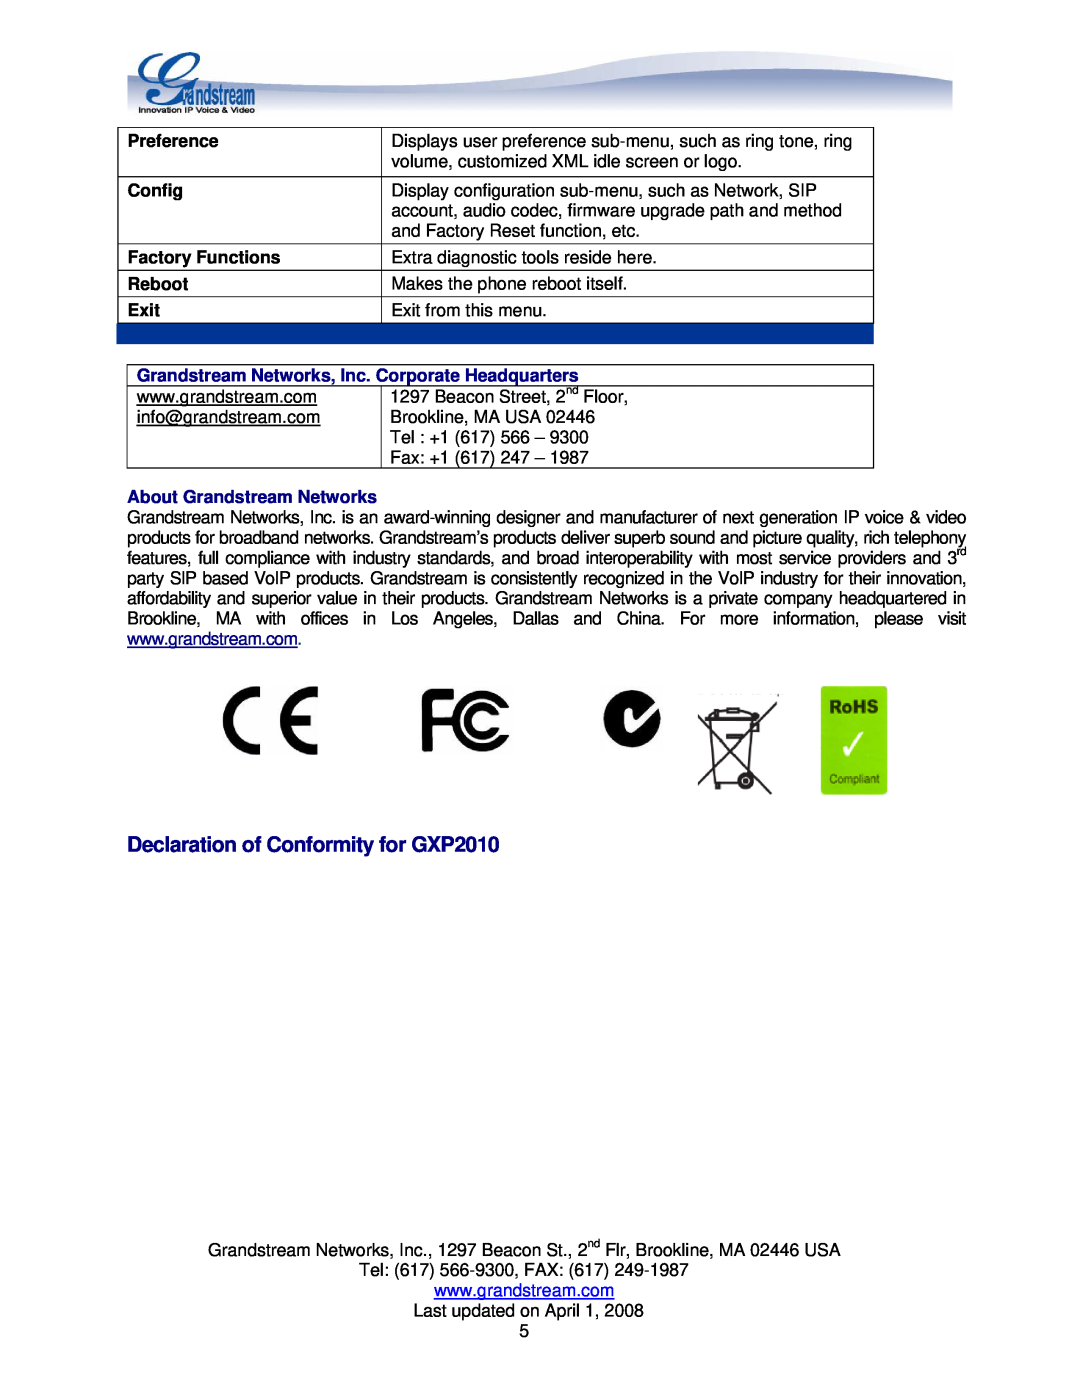 Grandstream Networks manual Declaration of Conformity for GXP2010, Preference, Config, Factory Functions, Reboot, Exit 